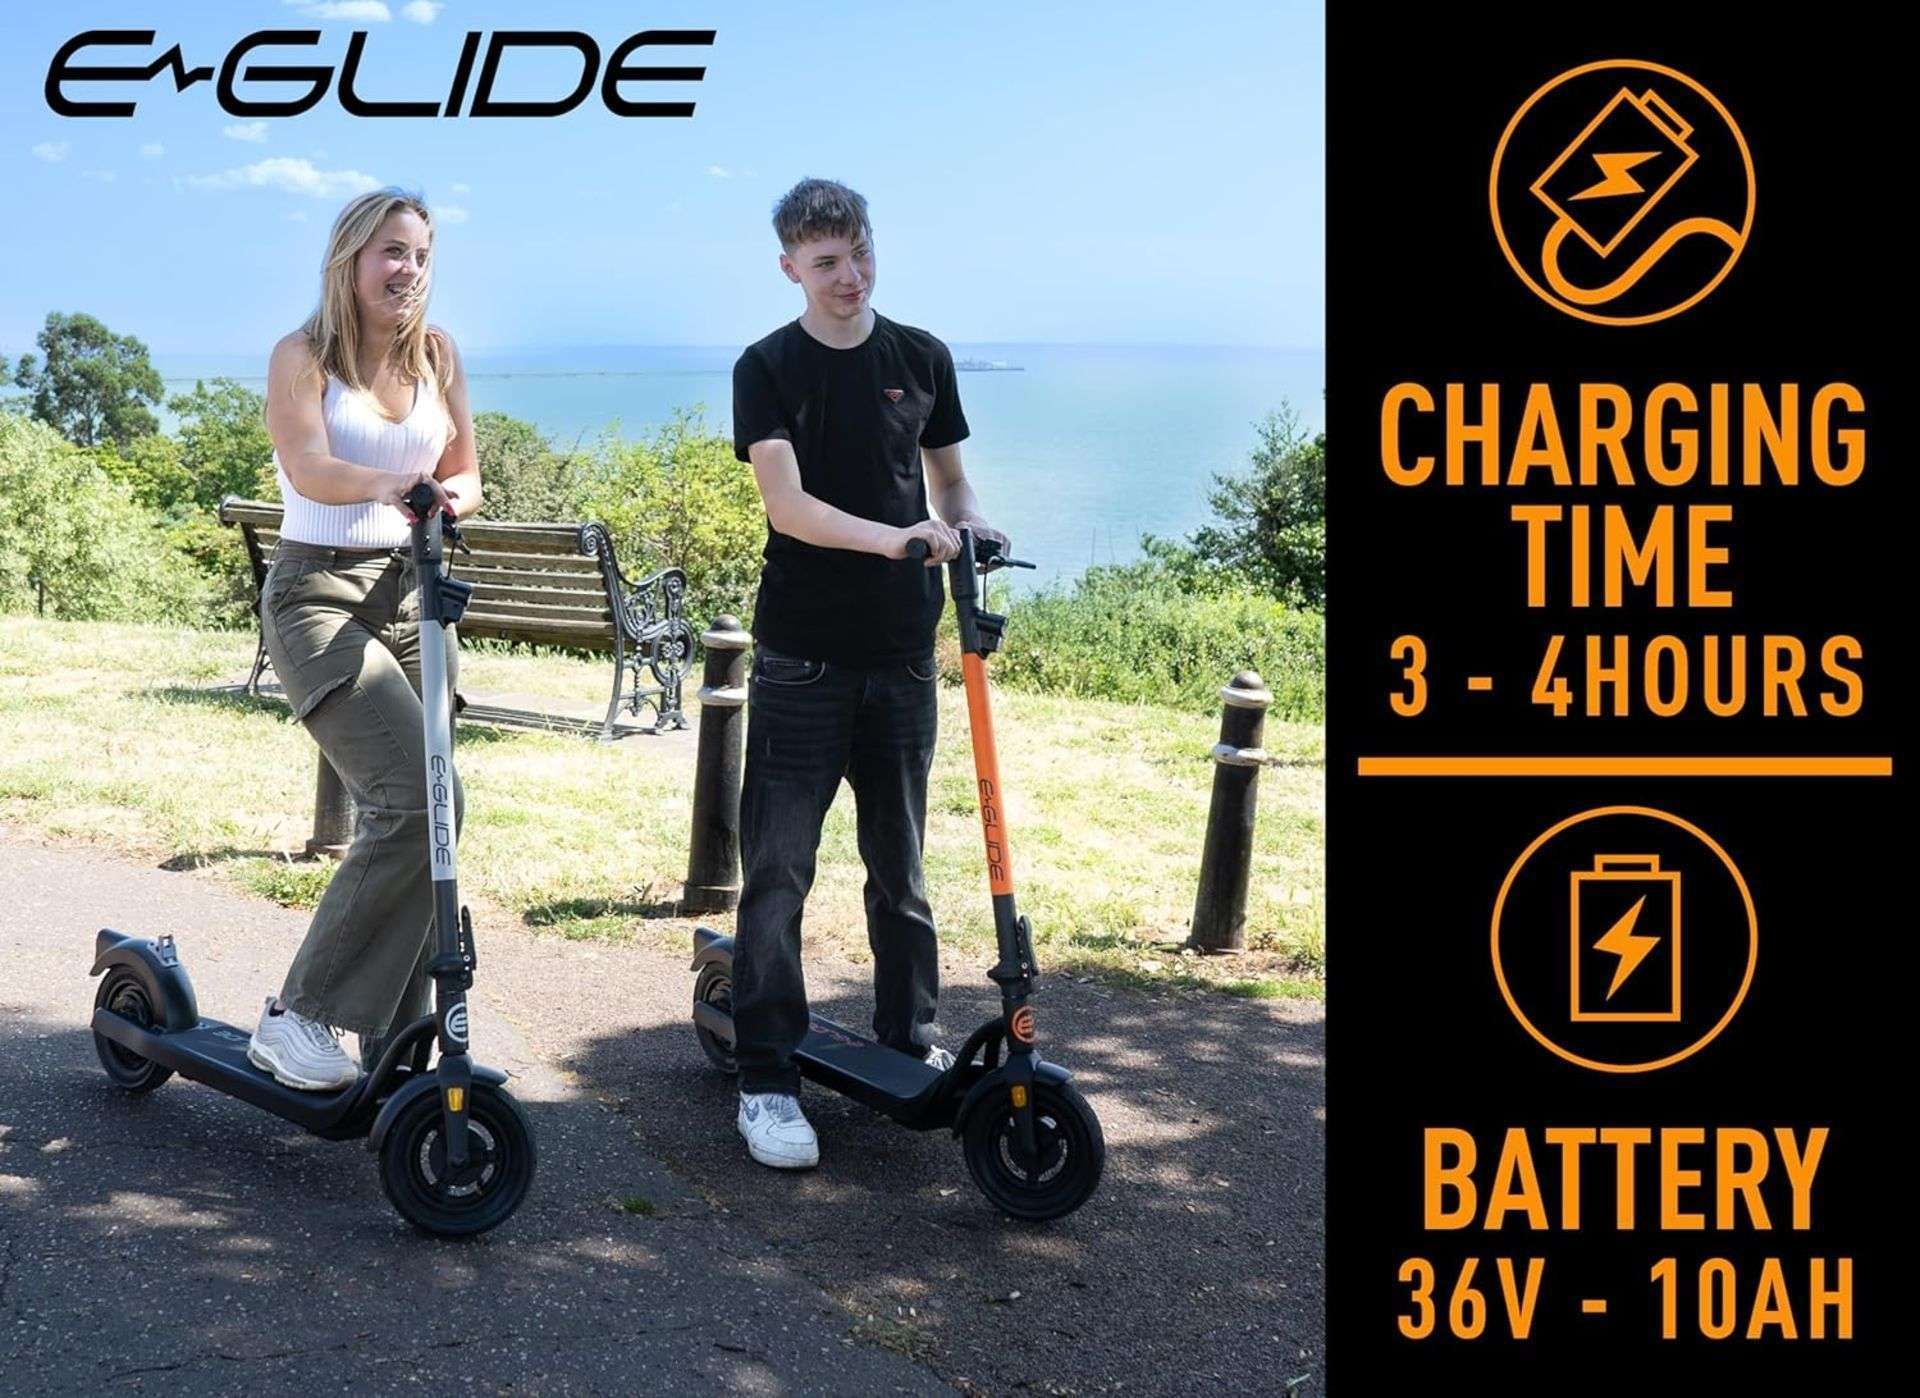 Trade Lot 4 x Brand New E-Glide V2 Electric Scooter Orange and Black RRP £599, Introducing a sleek - Image 4 of 5